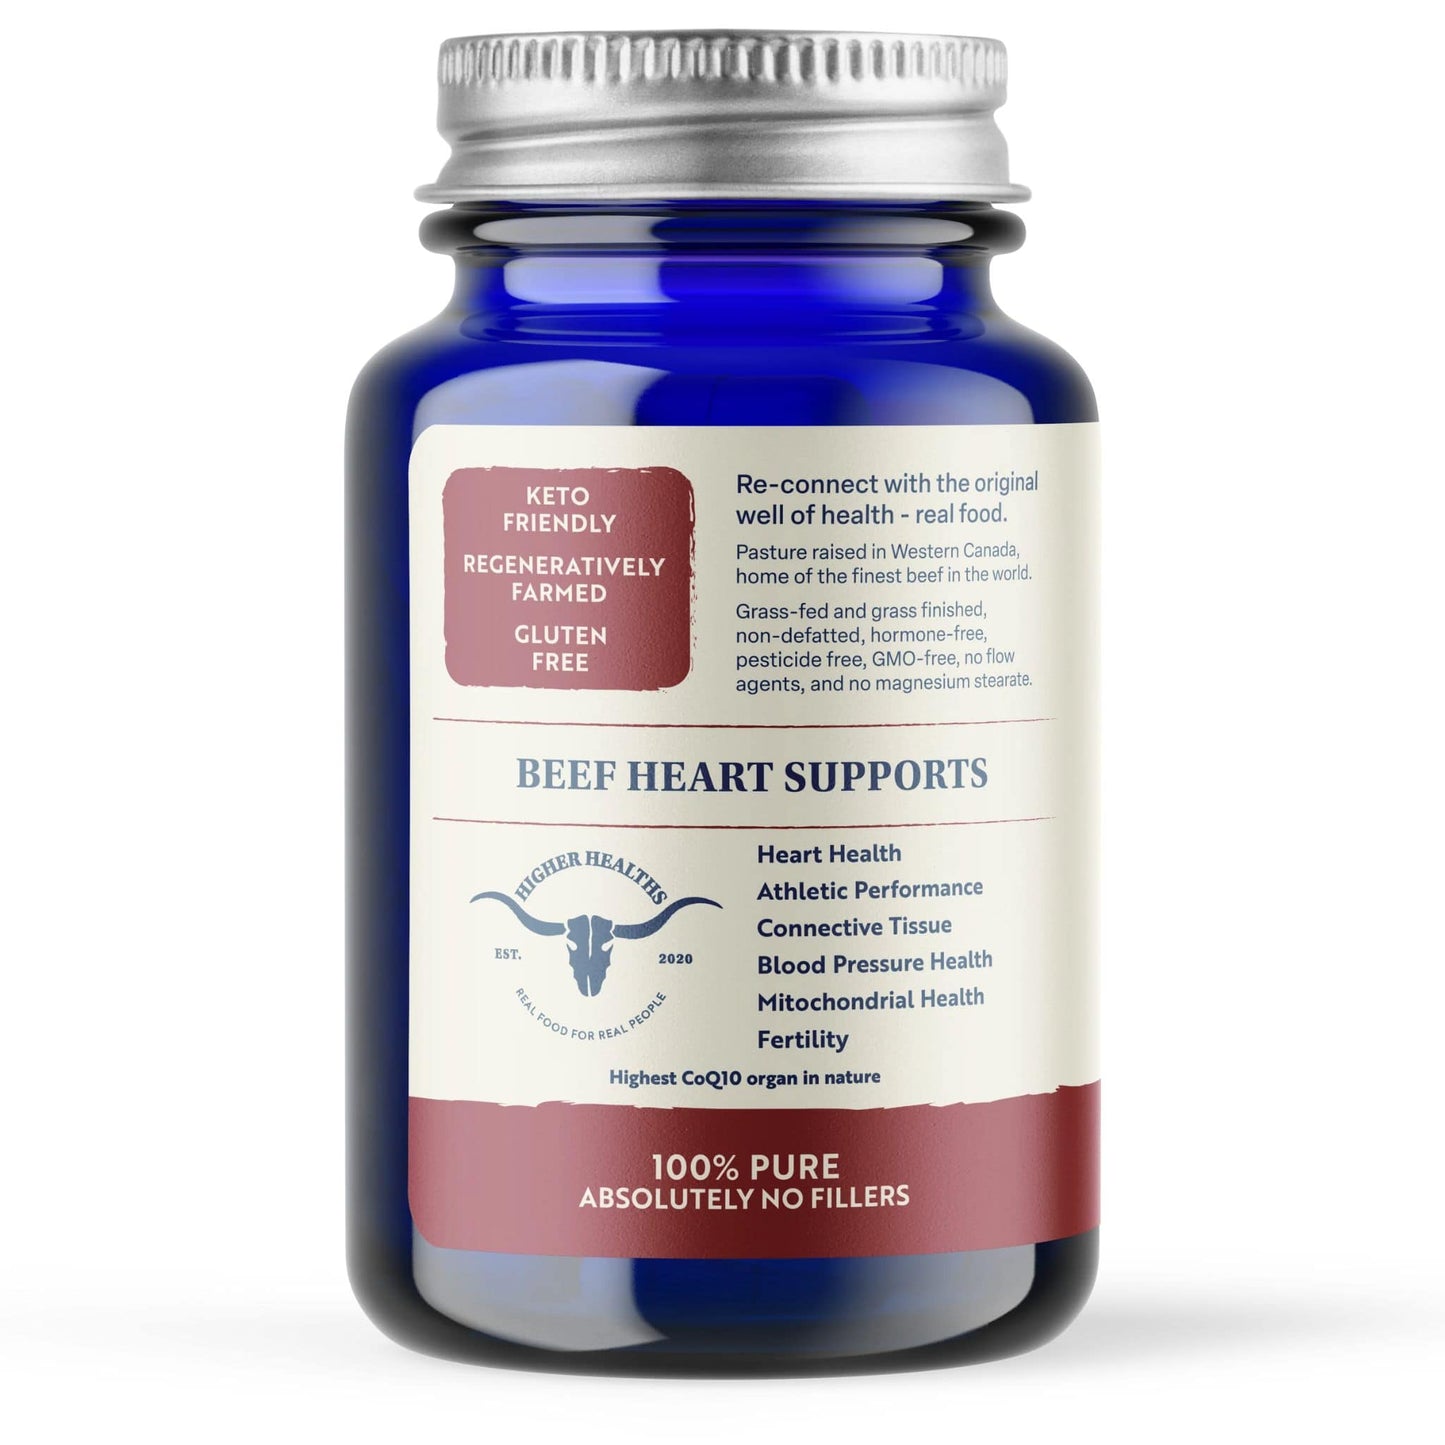 Higher Healths Grass-Fed Beef Heart 500mg, 180 Capsules